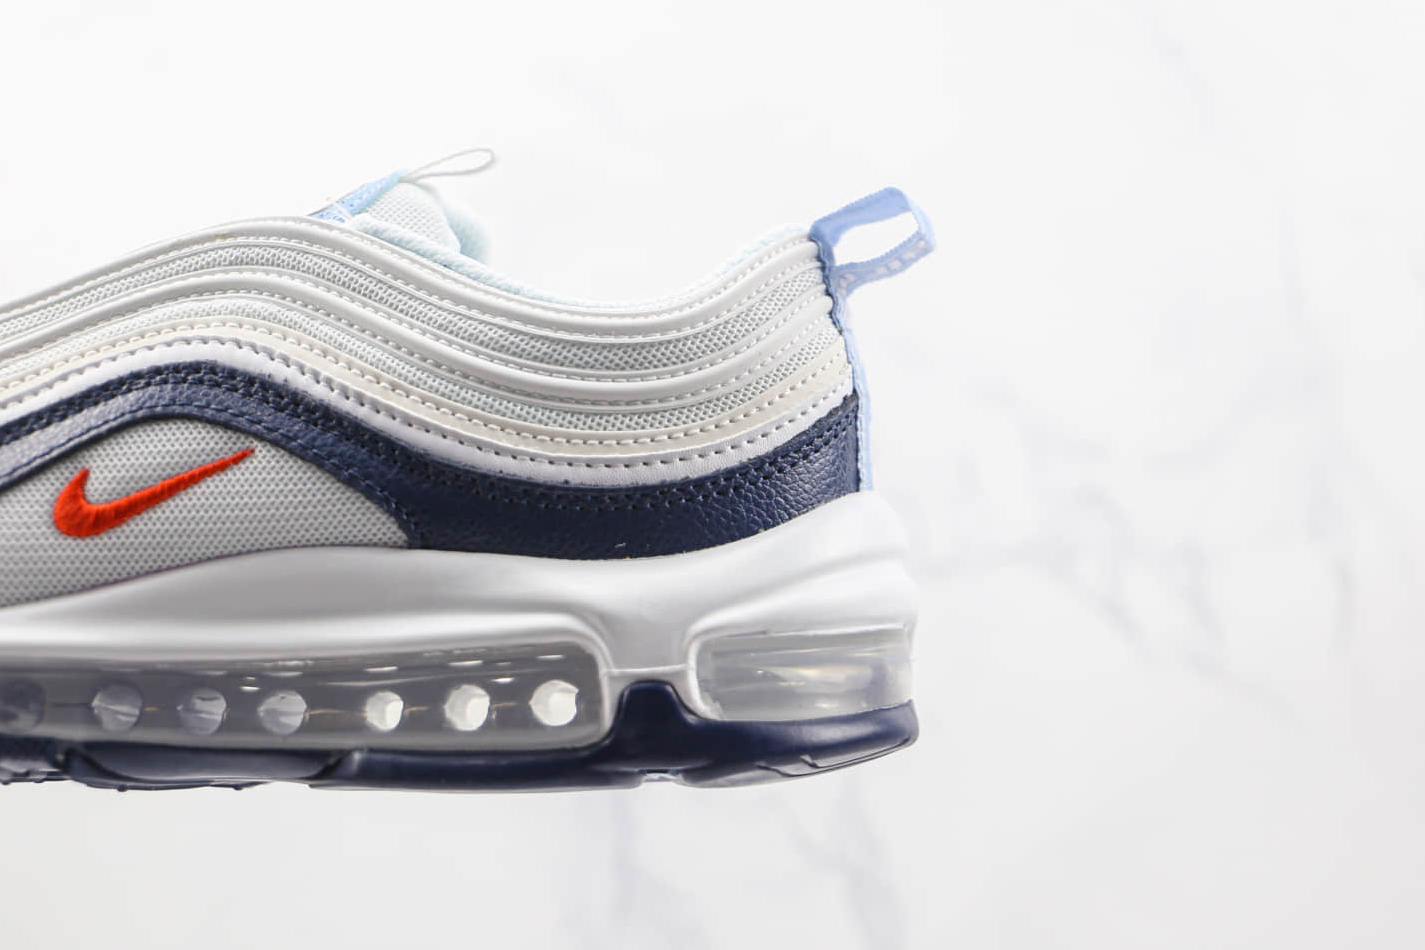 Nike Air Max 97 White Midnight Navy DM2824-100 - Stylish and Comfortable Sneakers